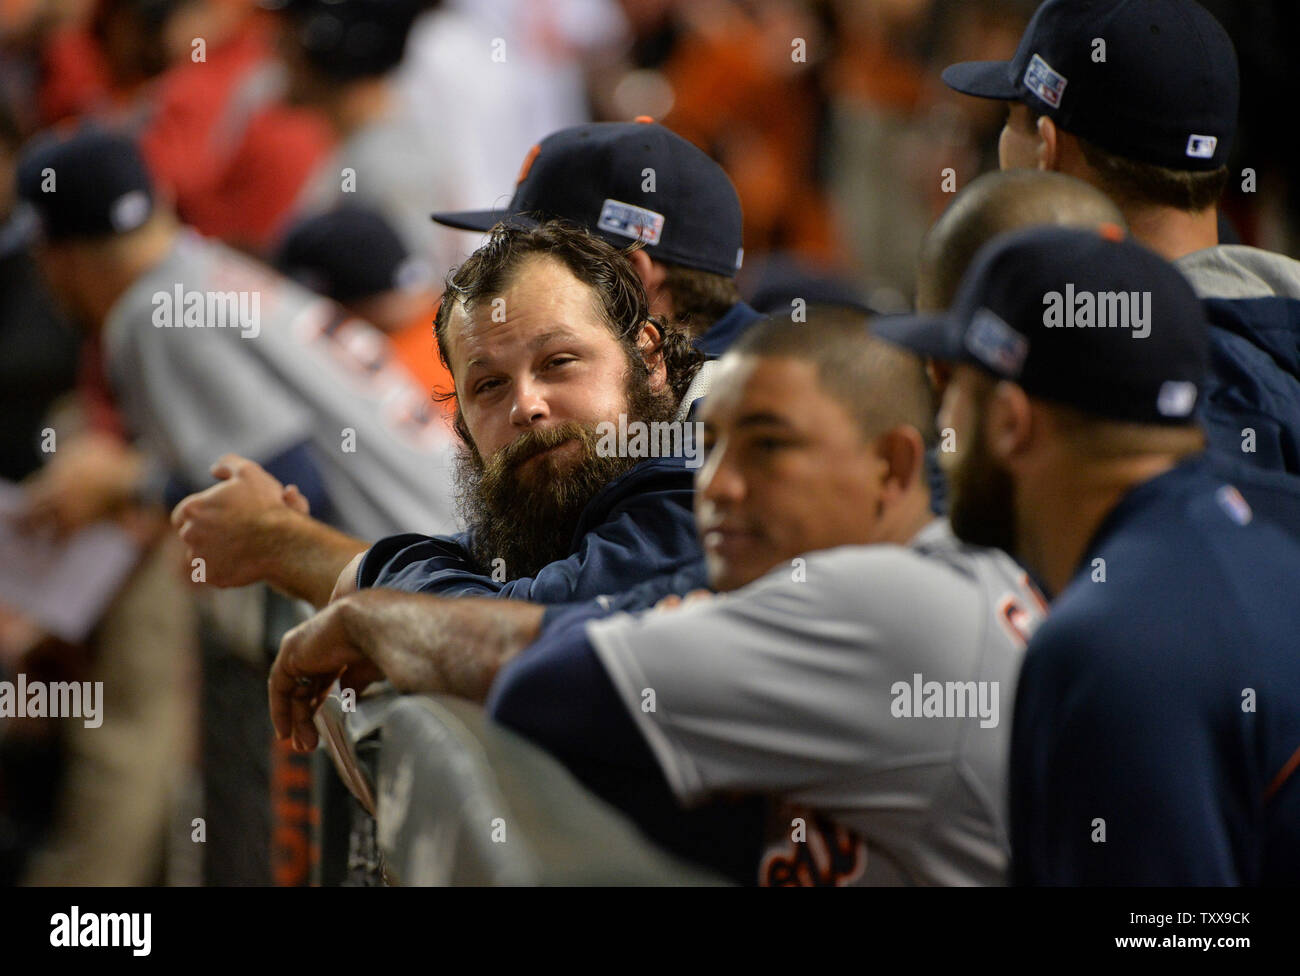 Detroit Tigers relief pitcher Joba Chamberlain and his teammates stand in the dugout during the ninth inning of game 1 of the American League Division Series against the Baltimore Orioles at Orioles Park at Camden Yards in Baltimore, Maryland on October 2, 2014.     UPI/Kevin Dietsch Stock Photo